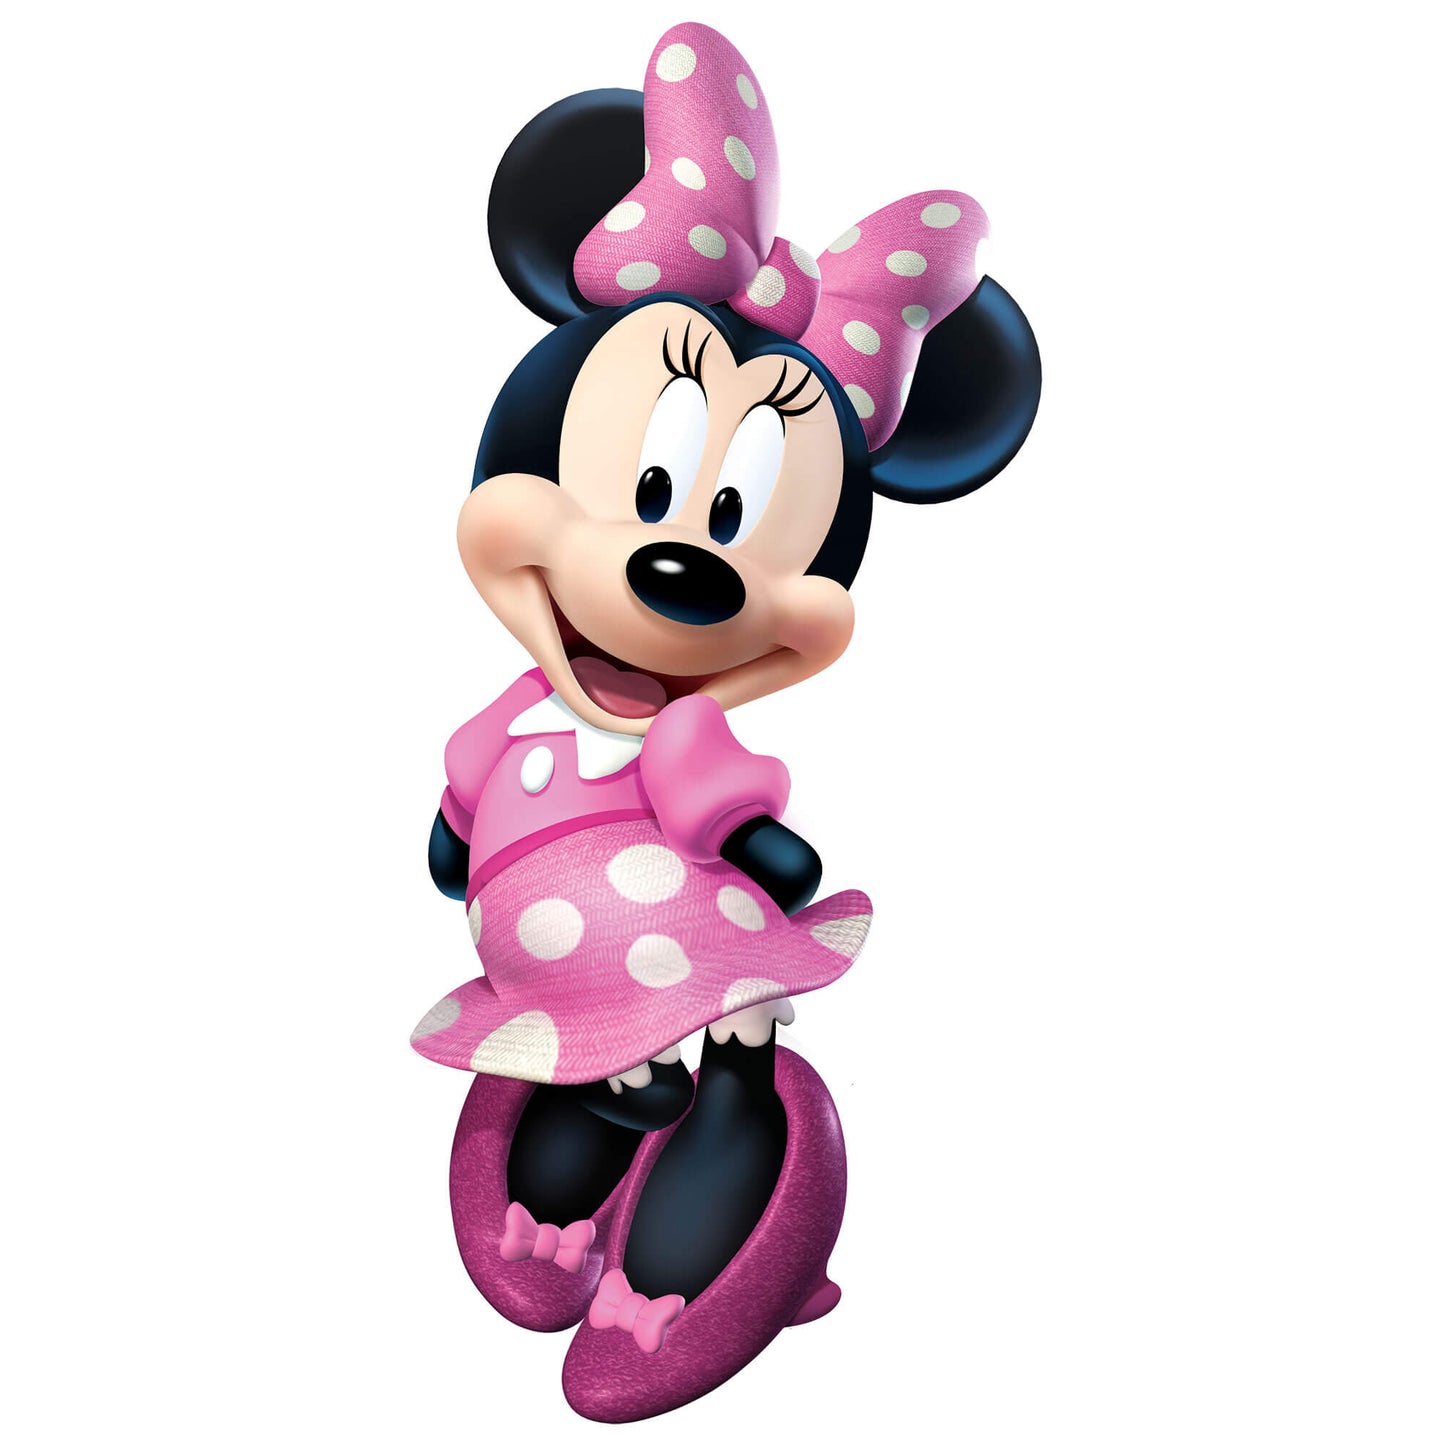 Minnie Mouse Bow-Tique Giant Peel & Stick Wall Decal